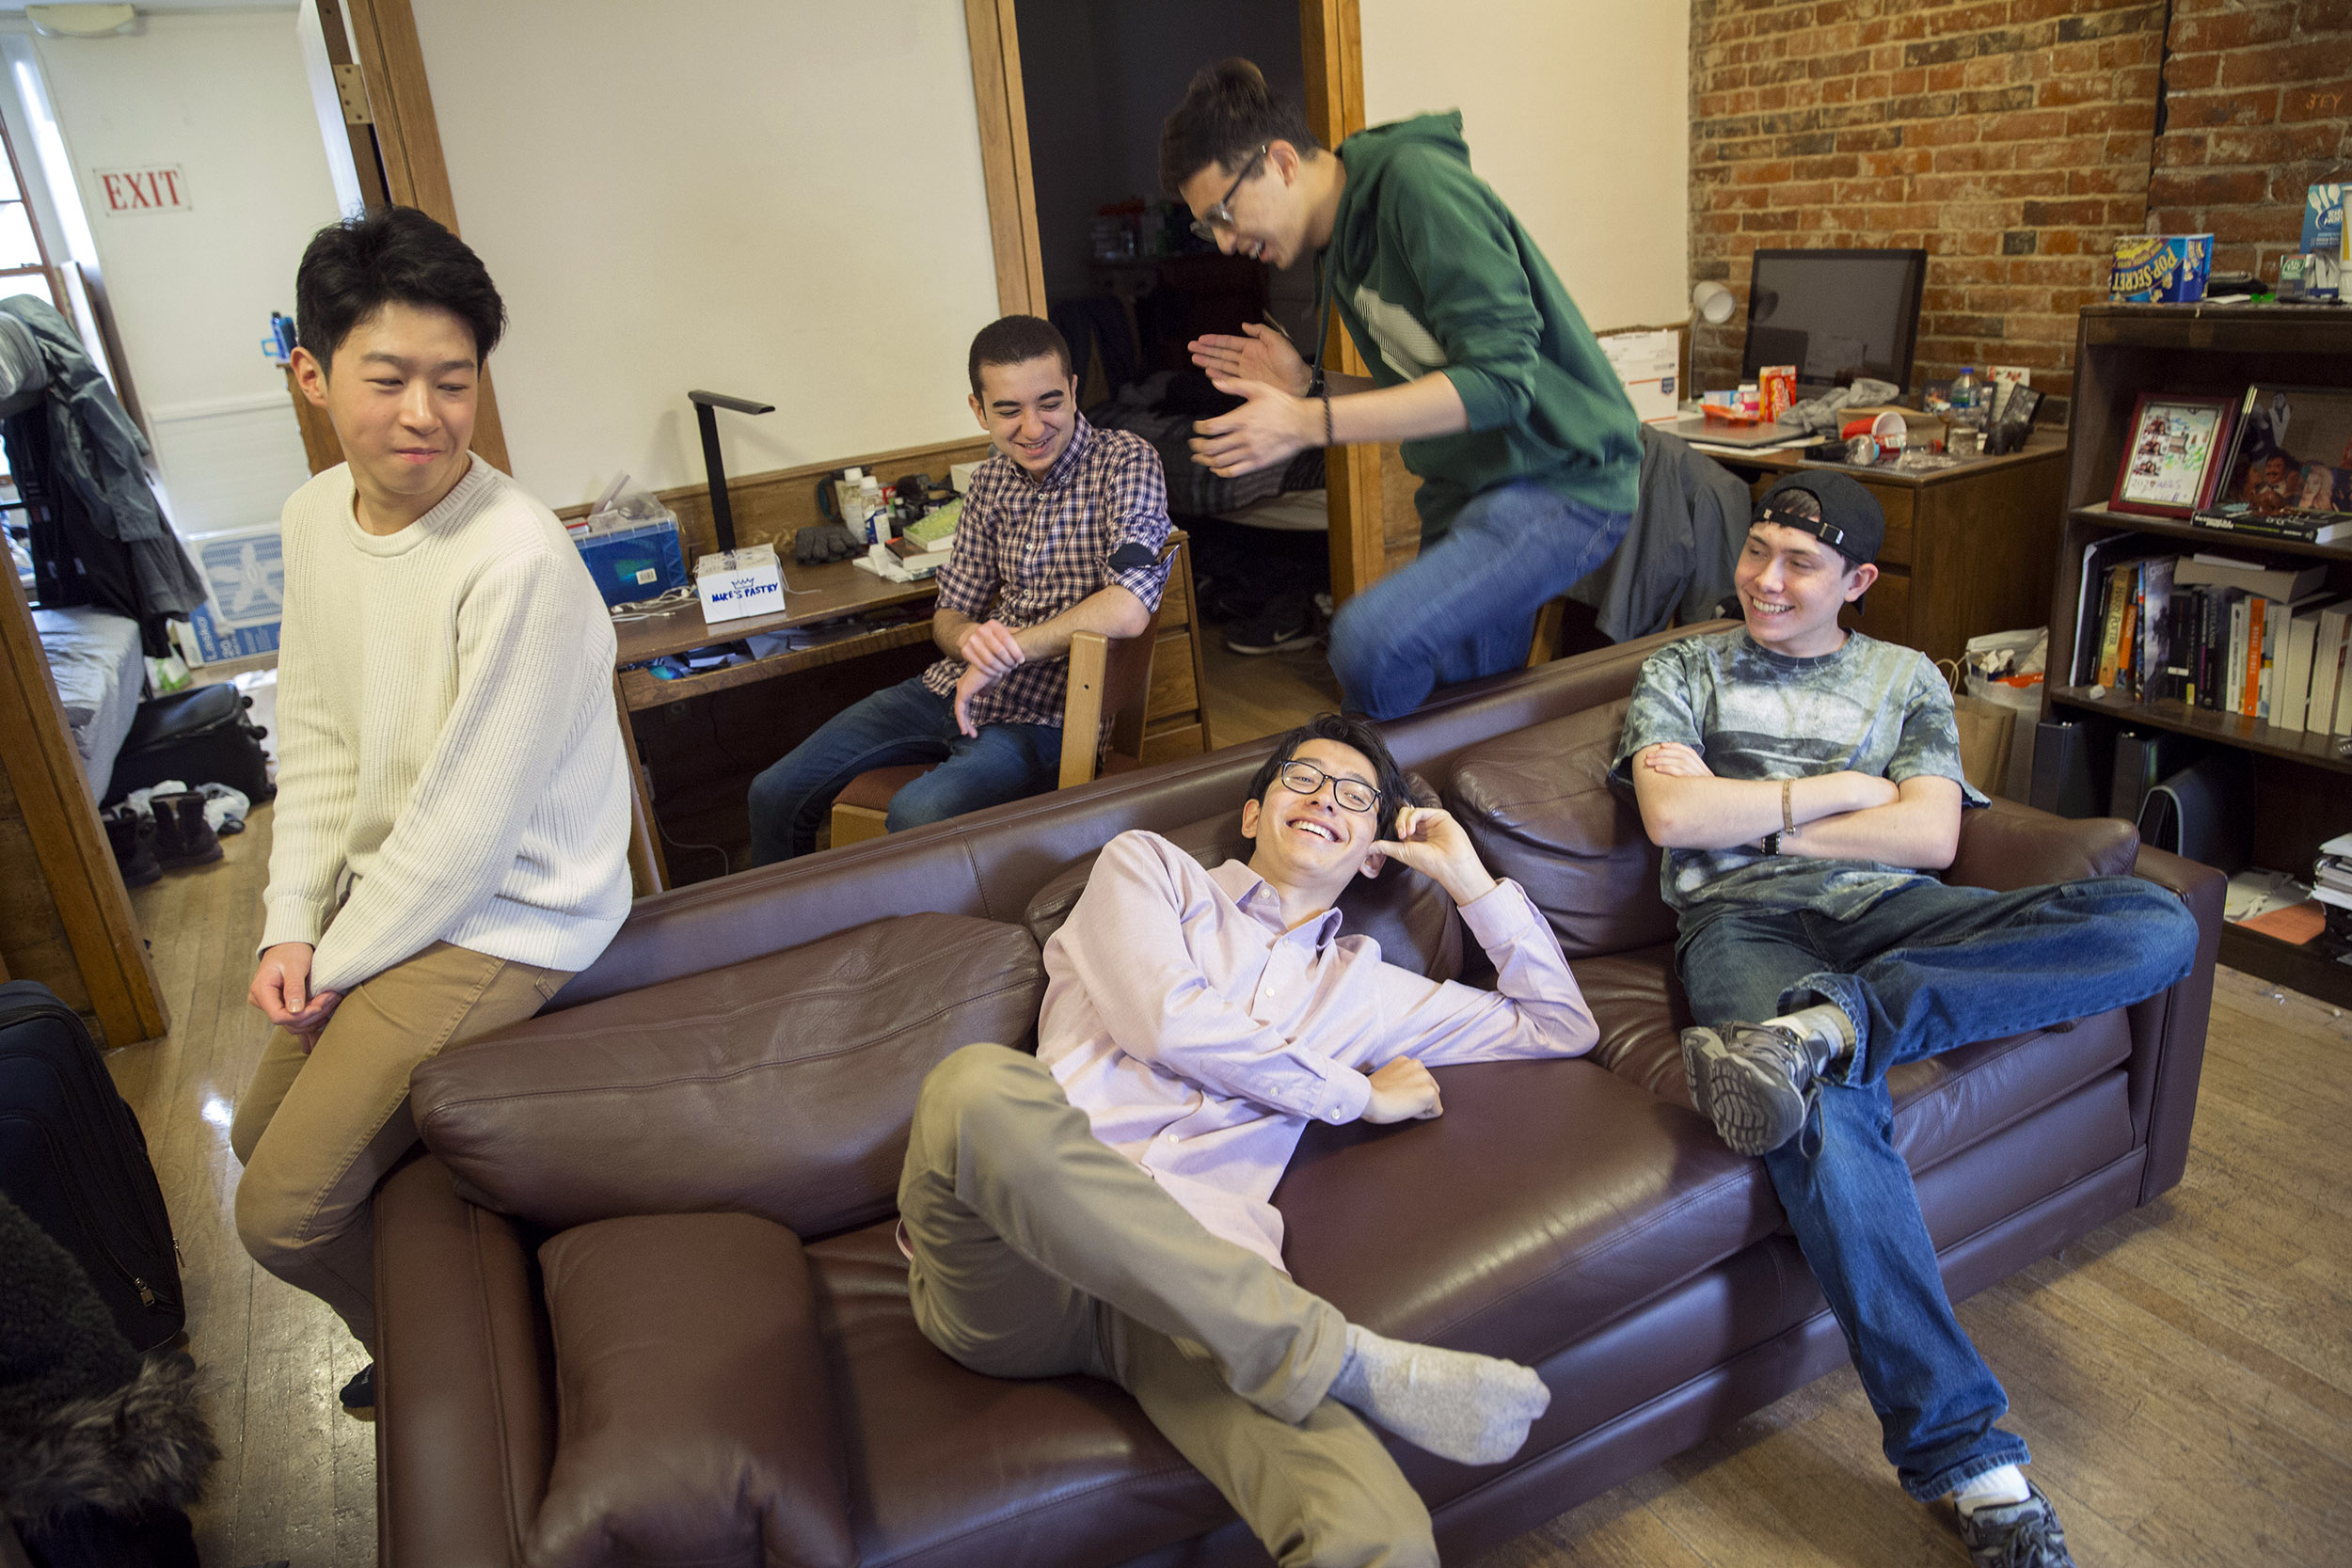 Roommates, Luke Xu, (from left to right) Abdelrhman "Abdul" Saleh (plaid shirt), Sung Ahn (green sweatshirt), Kenneth Shinozuka (wearing socks), and Clifford "Scotty" Courvoisier, All class of '20 live in Holworthy Hall together.